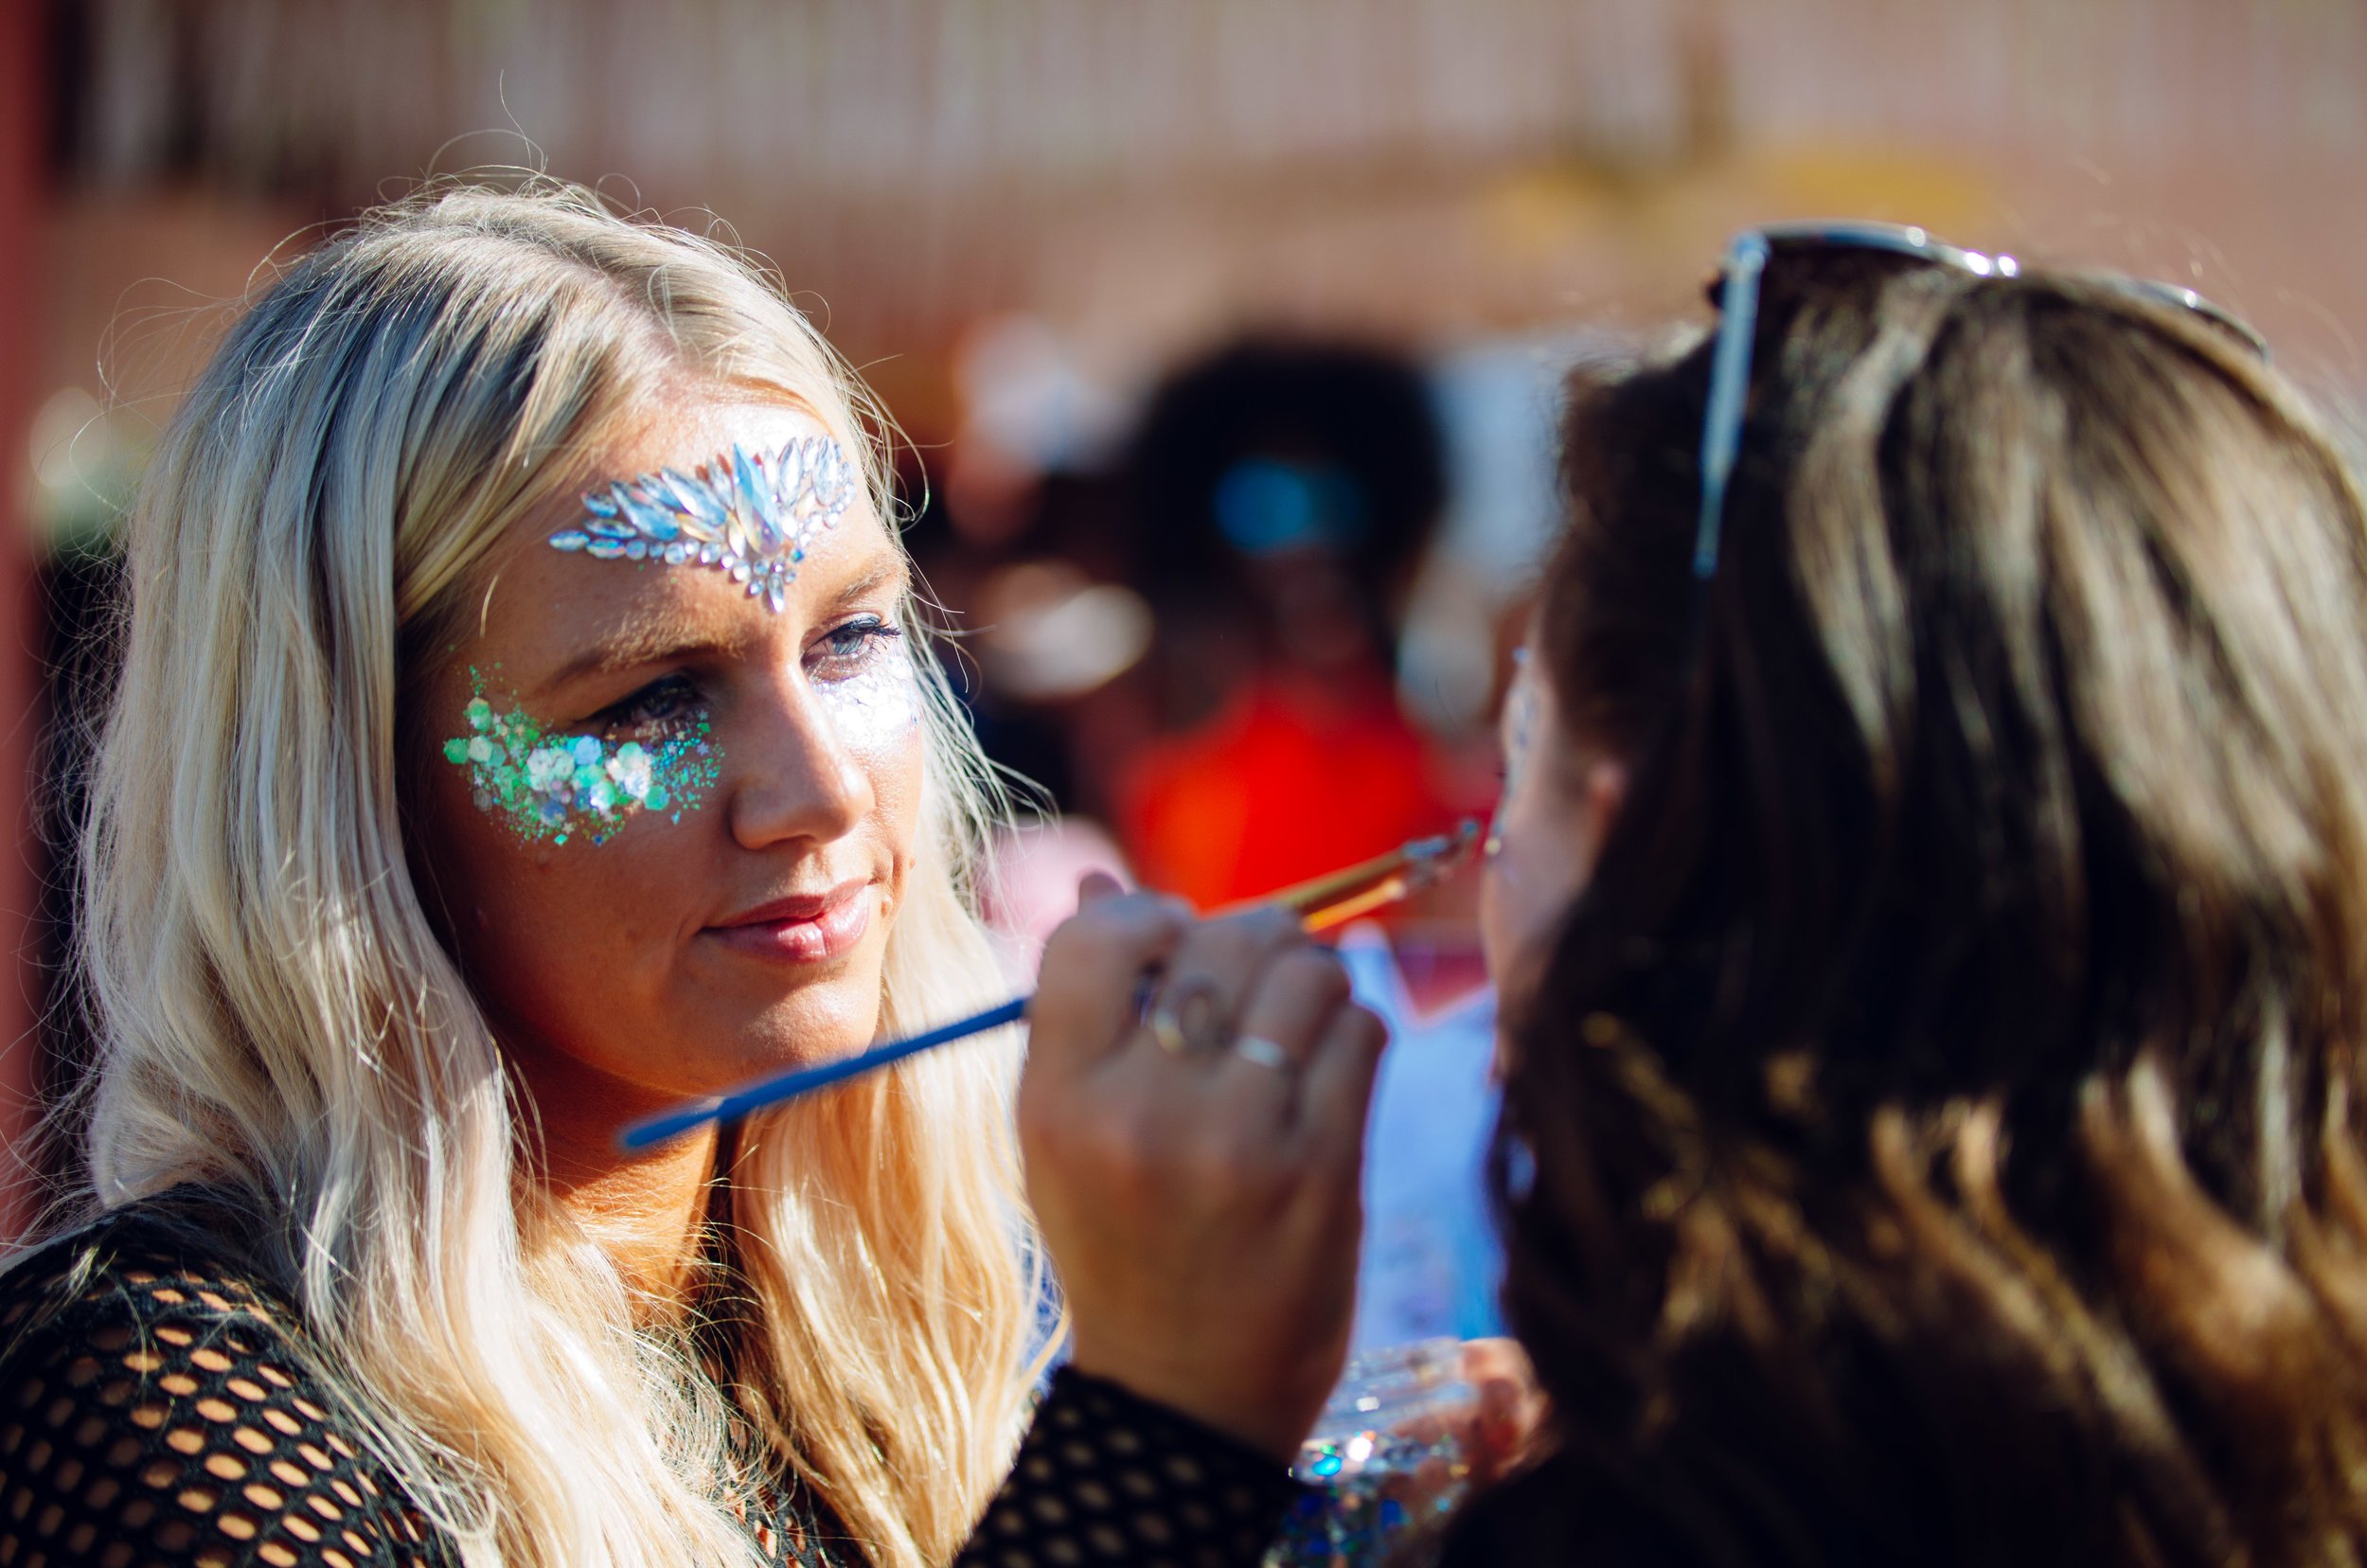 Ultimate Hollywood Coachella Poolside Party the gypsy shrine jewels and glitter makeover.jpg